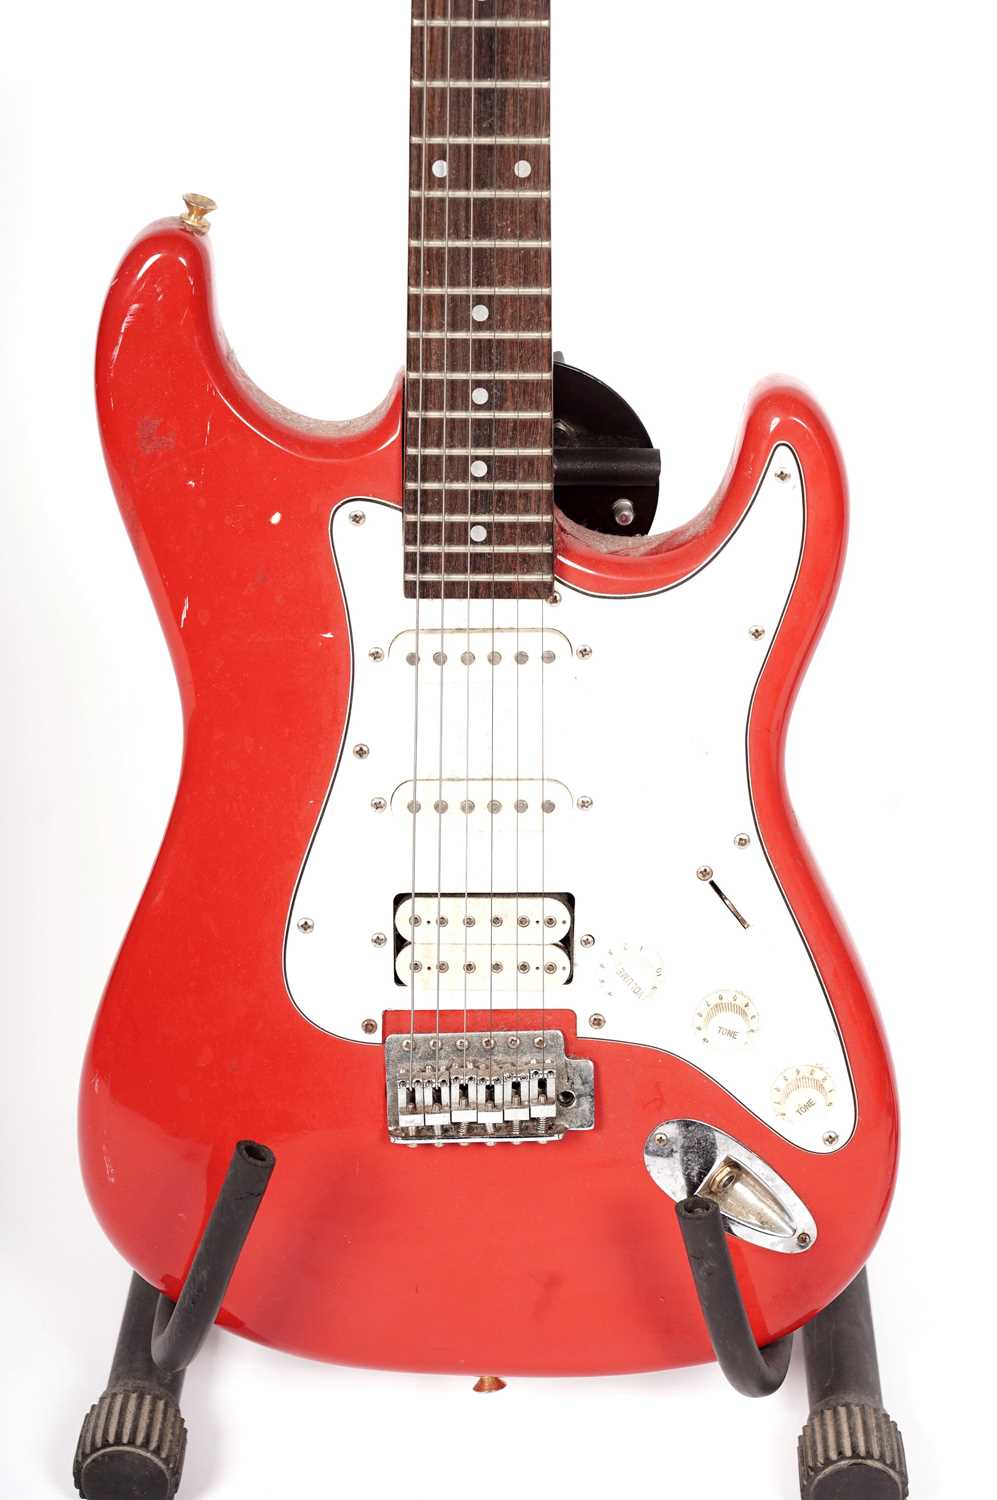 A Squier Stratocaster electric guitar - Image 3 of 4